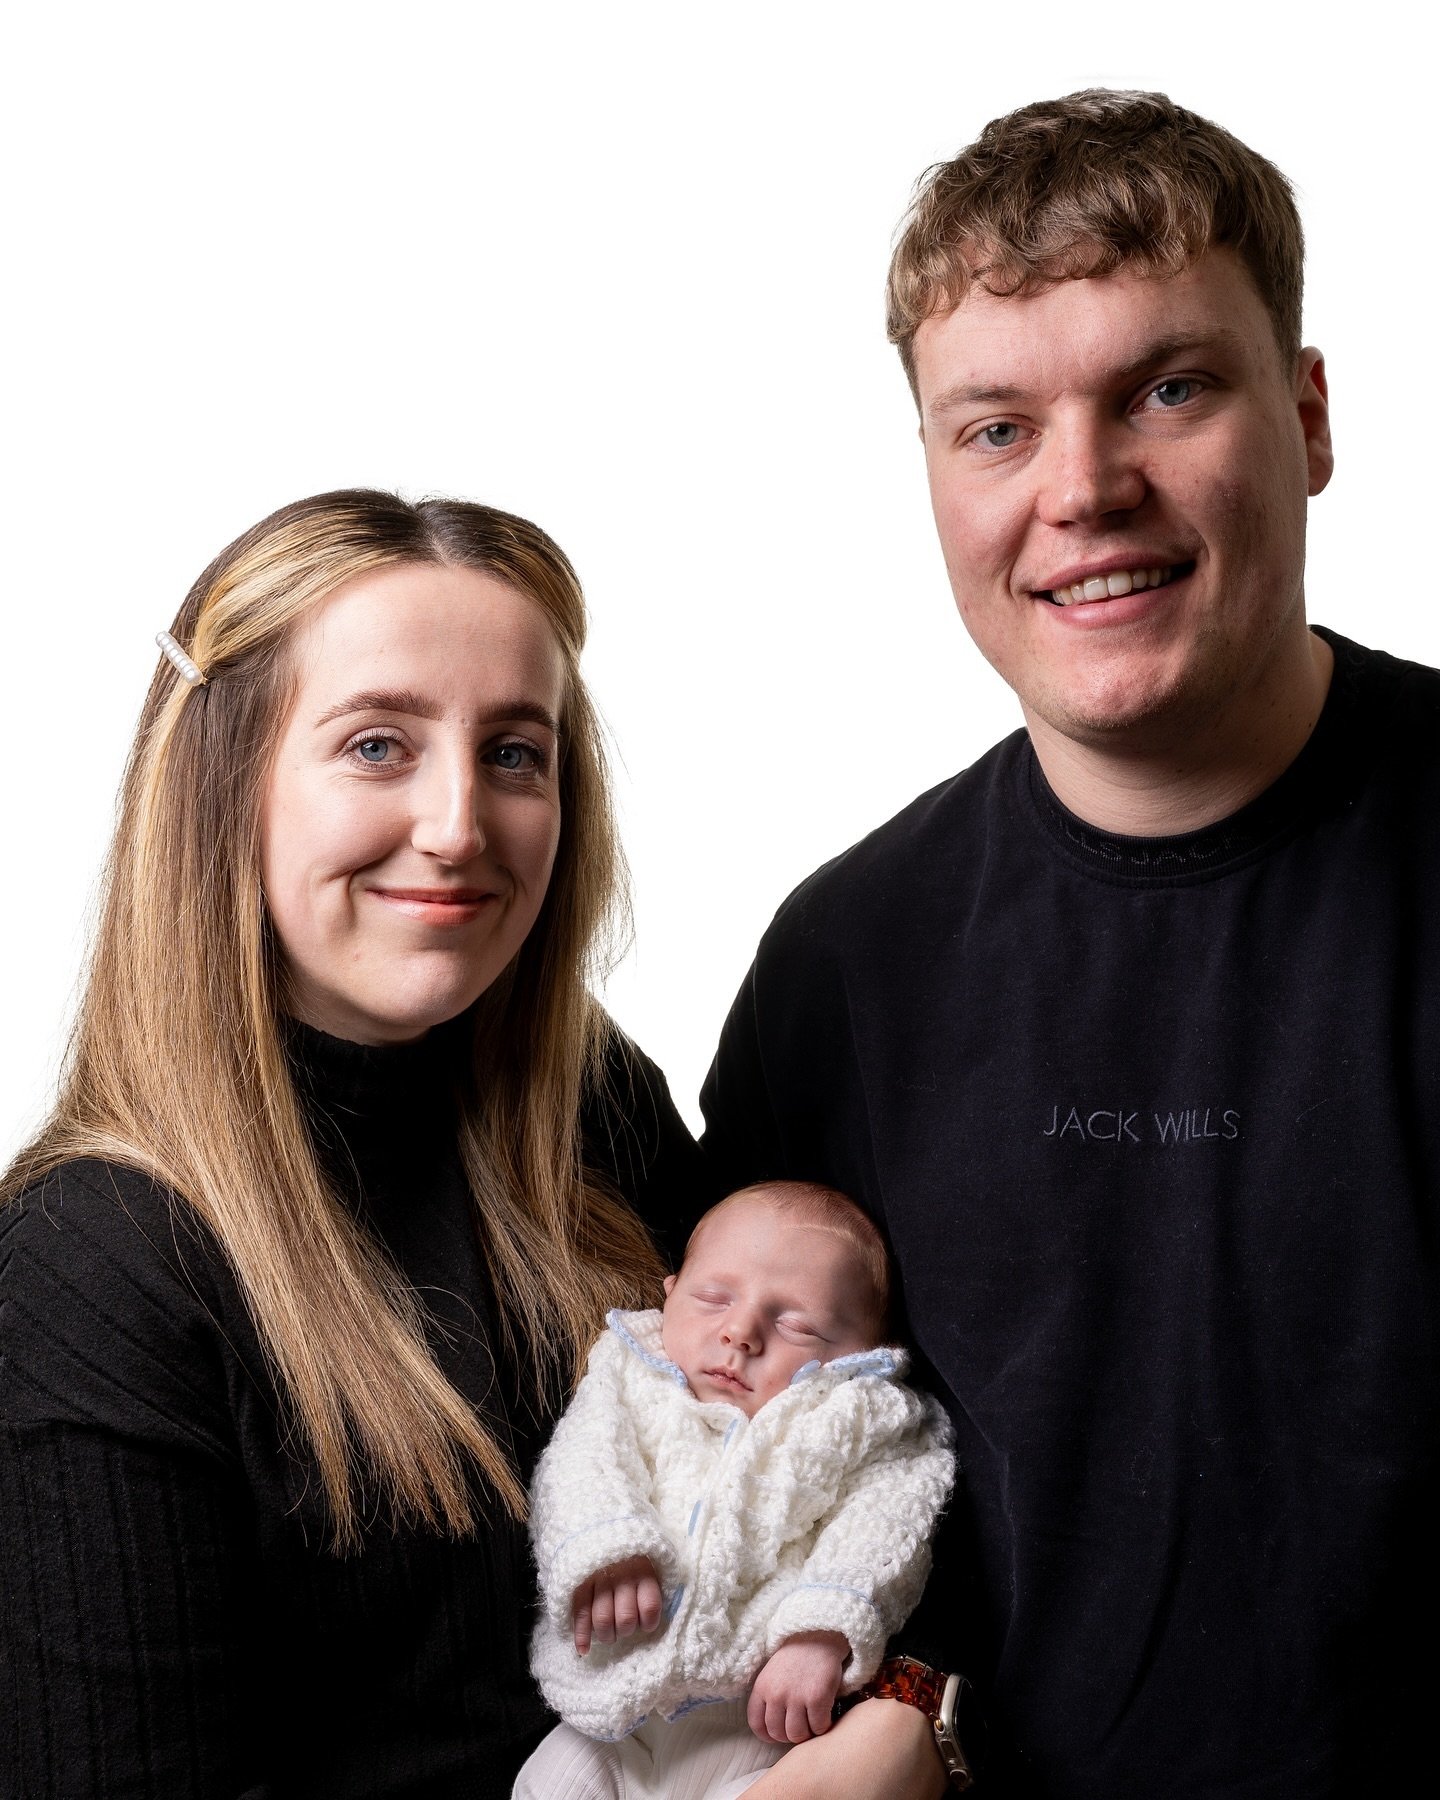 Proud mum and dad with baby T&hellip;
.
.
.
.
#familyphotography #familyphotographer #photography #newbornphotography #love #photographer #familytime #portraitphotography #potd #portrait #babyphotography #photoshoot #lifestylephotography #newborn #ba